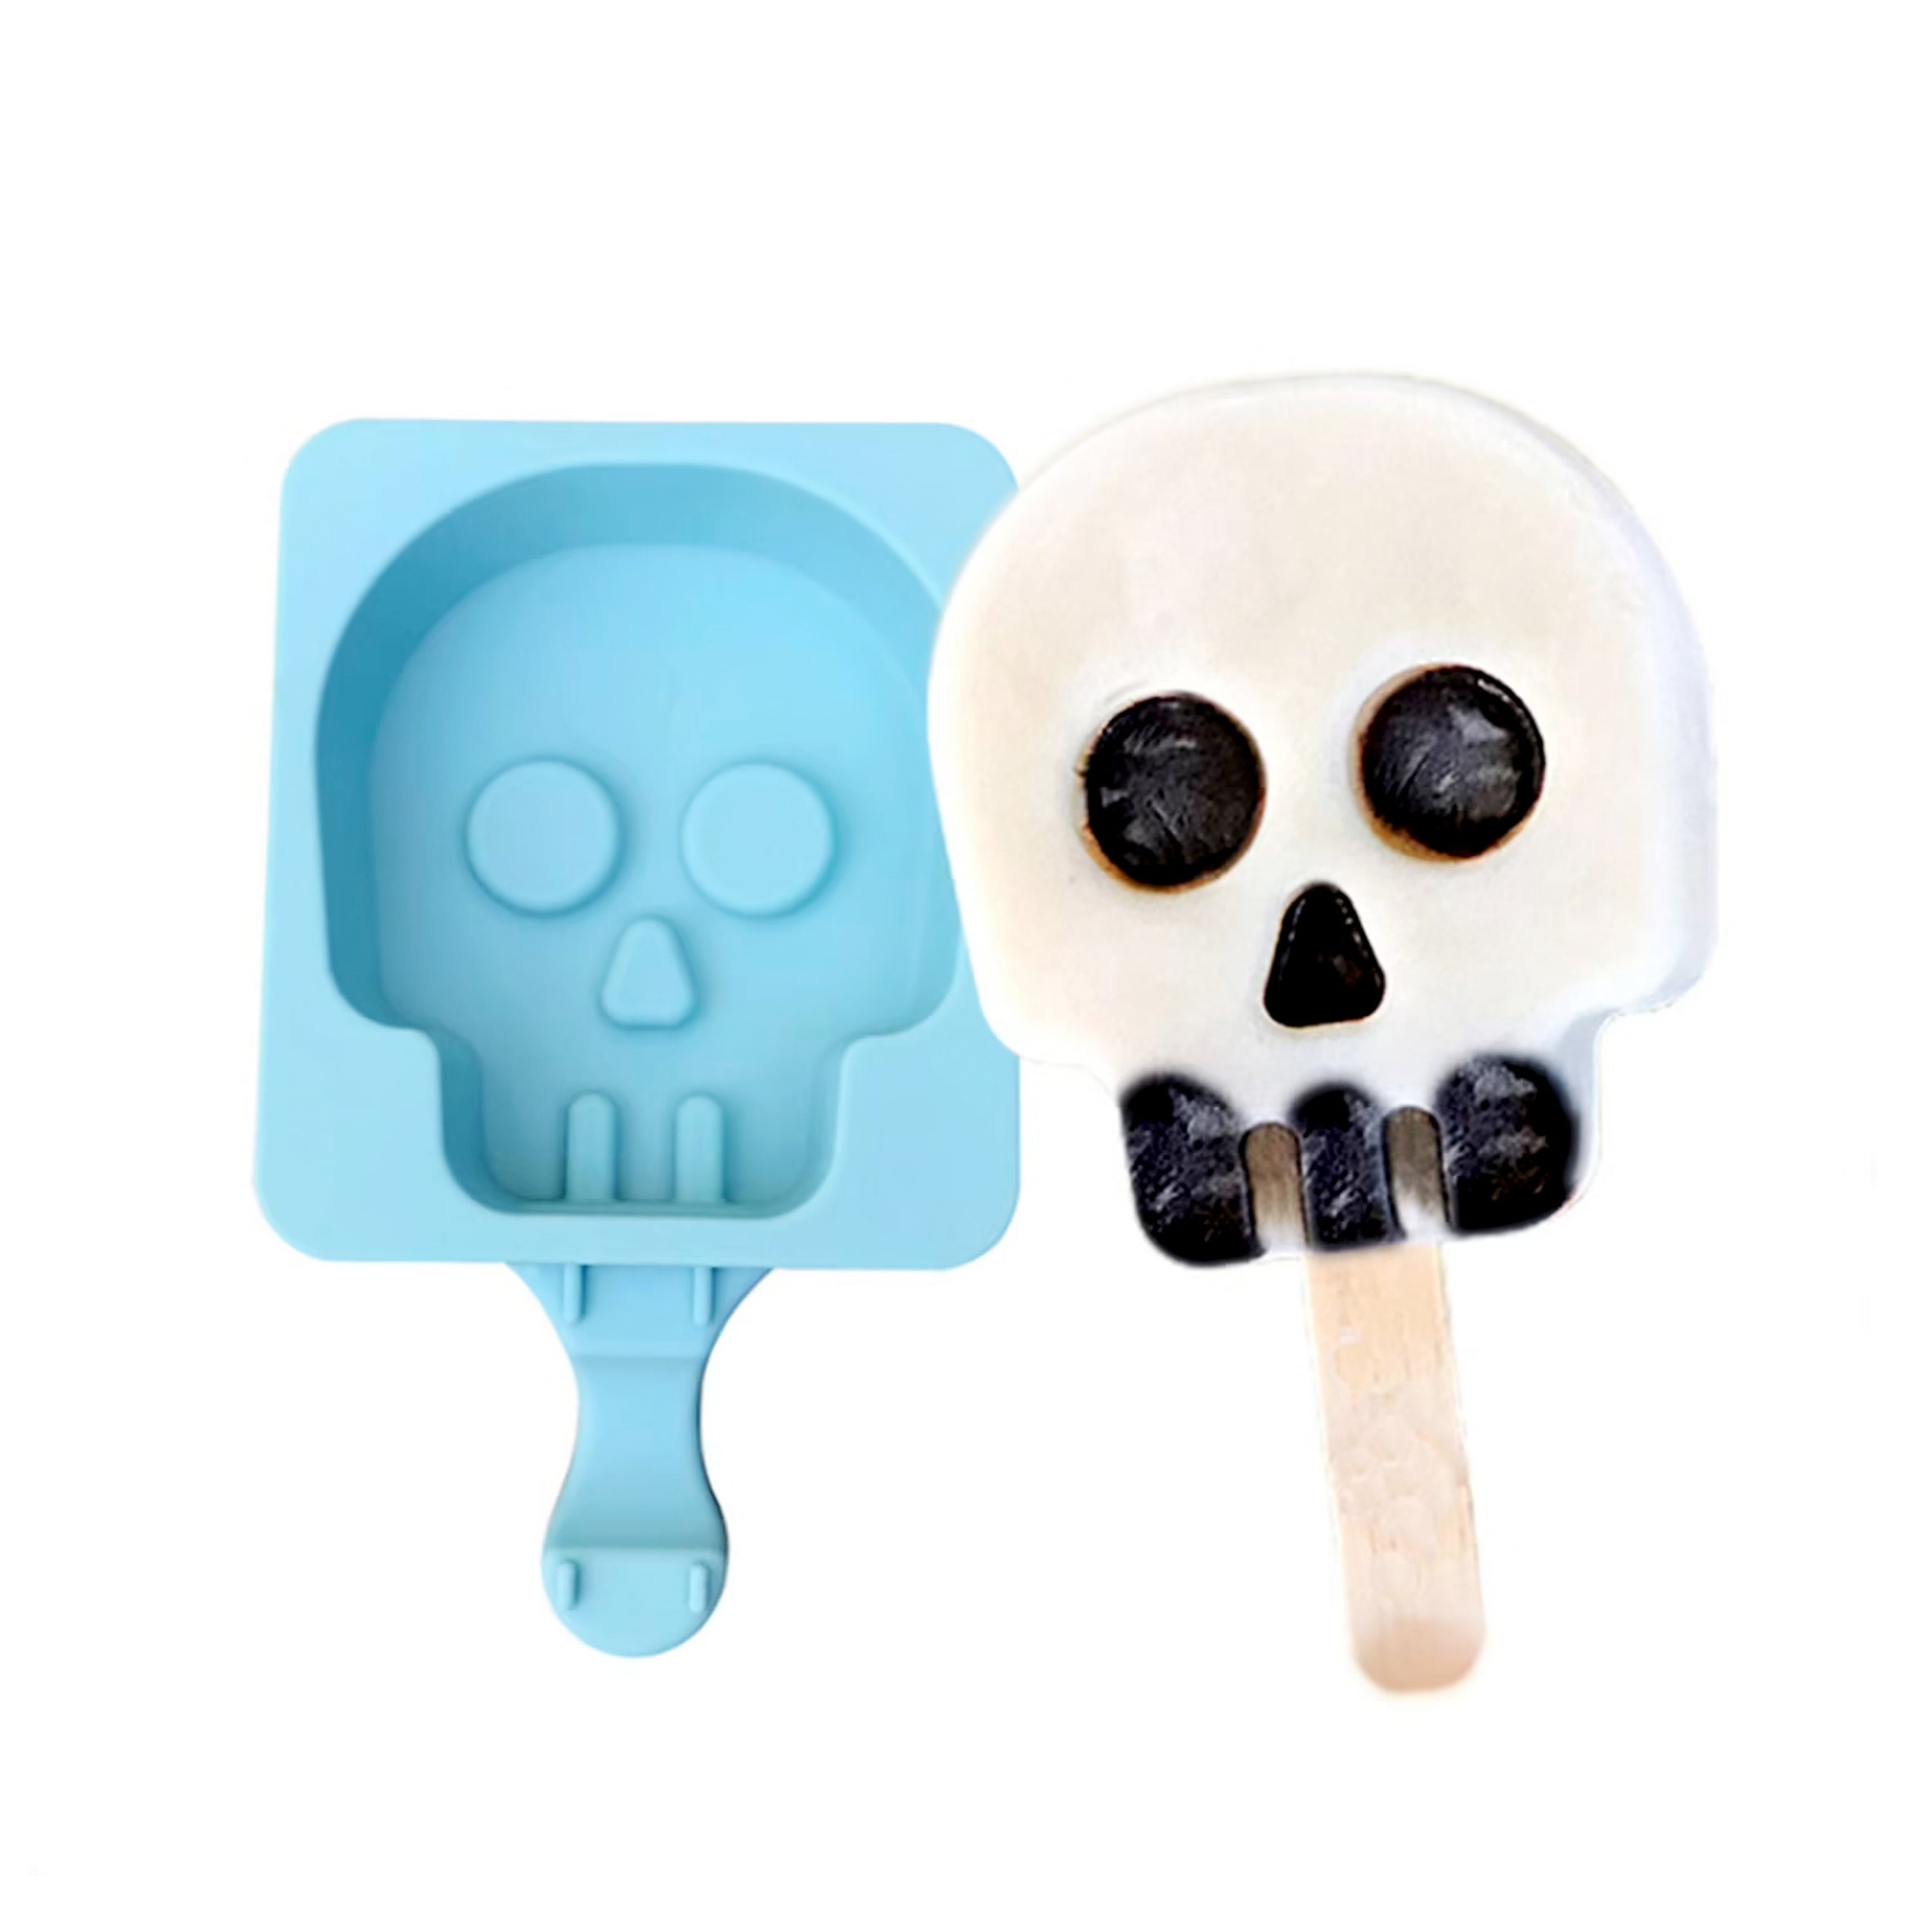 Halloween Skull Silicone Cakesicle Mould + Popsicle Sticks